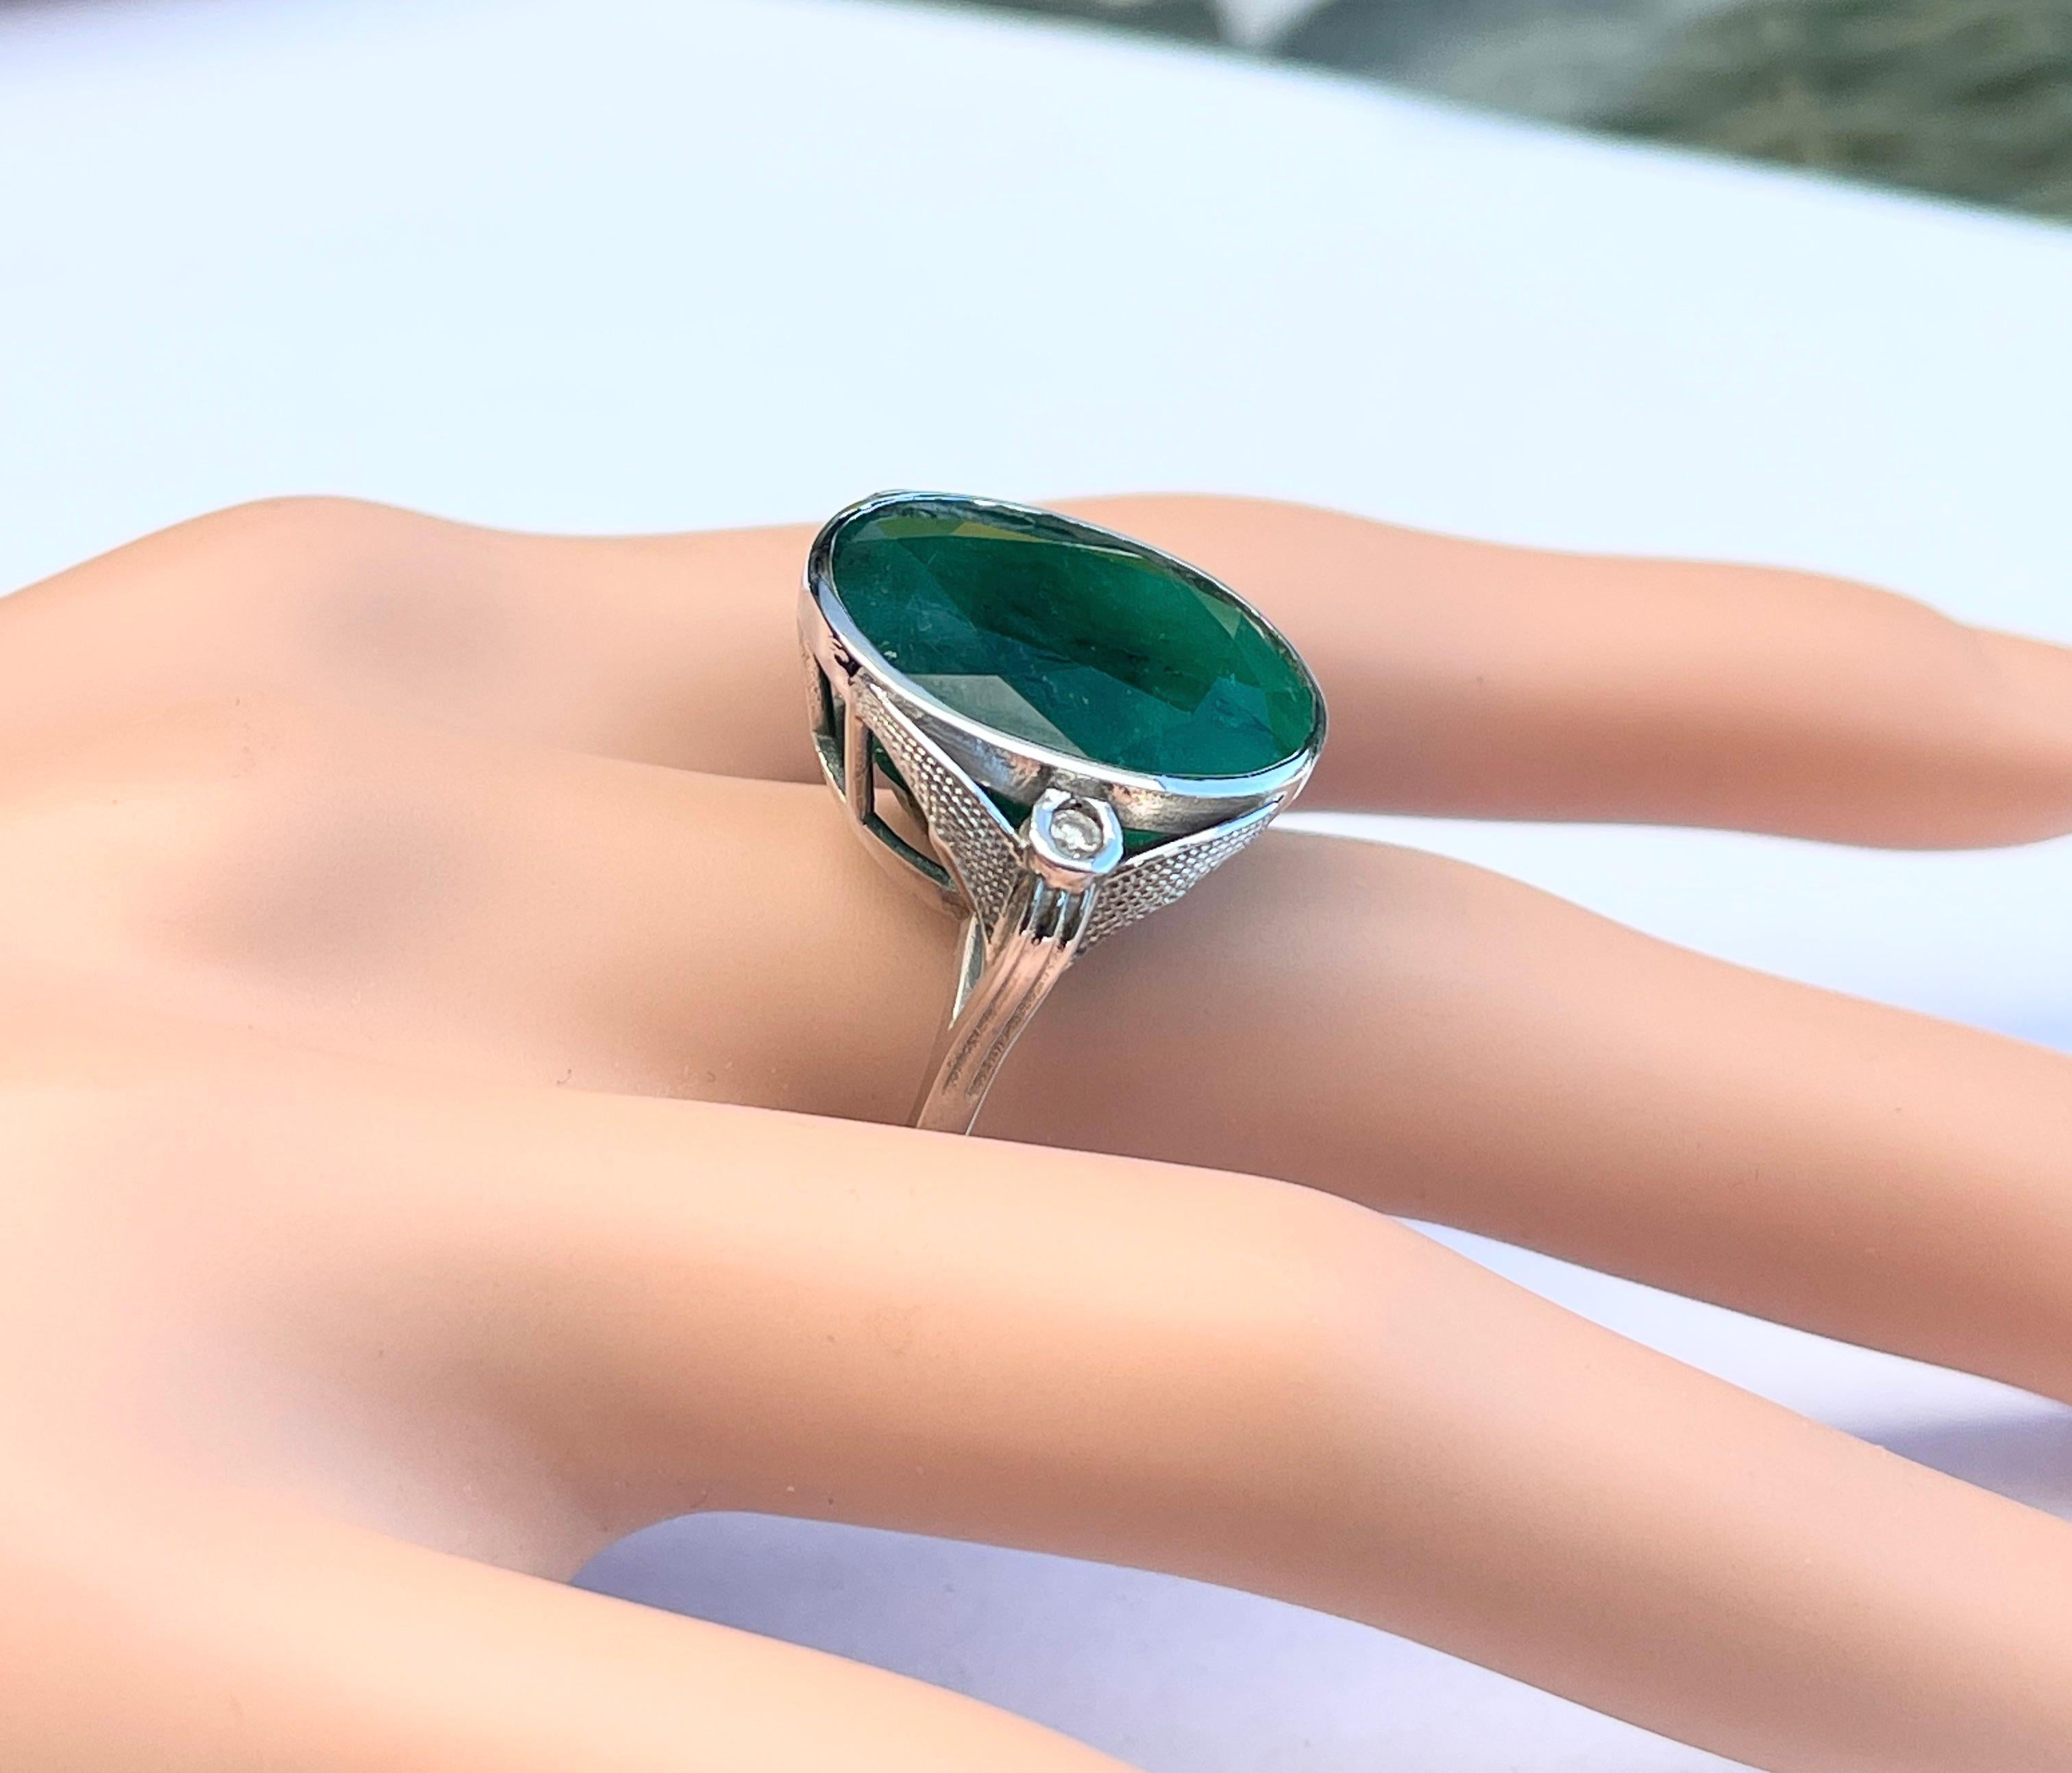 Amazing Huge 20CT Natural Emerald Diamond Ring 9ct White Gold with Valuation For Sale 1